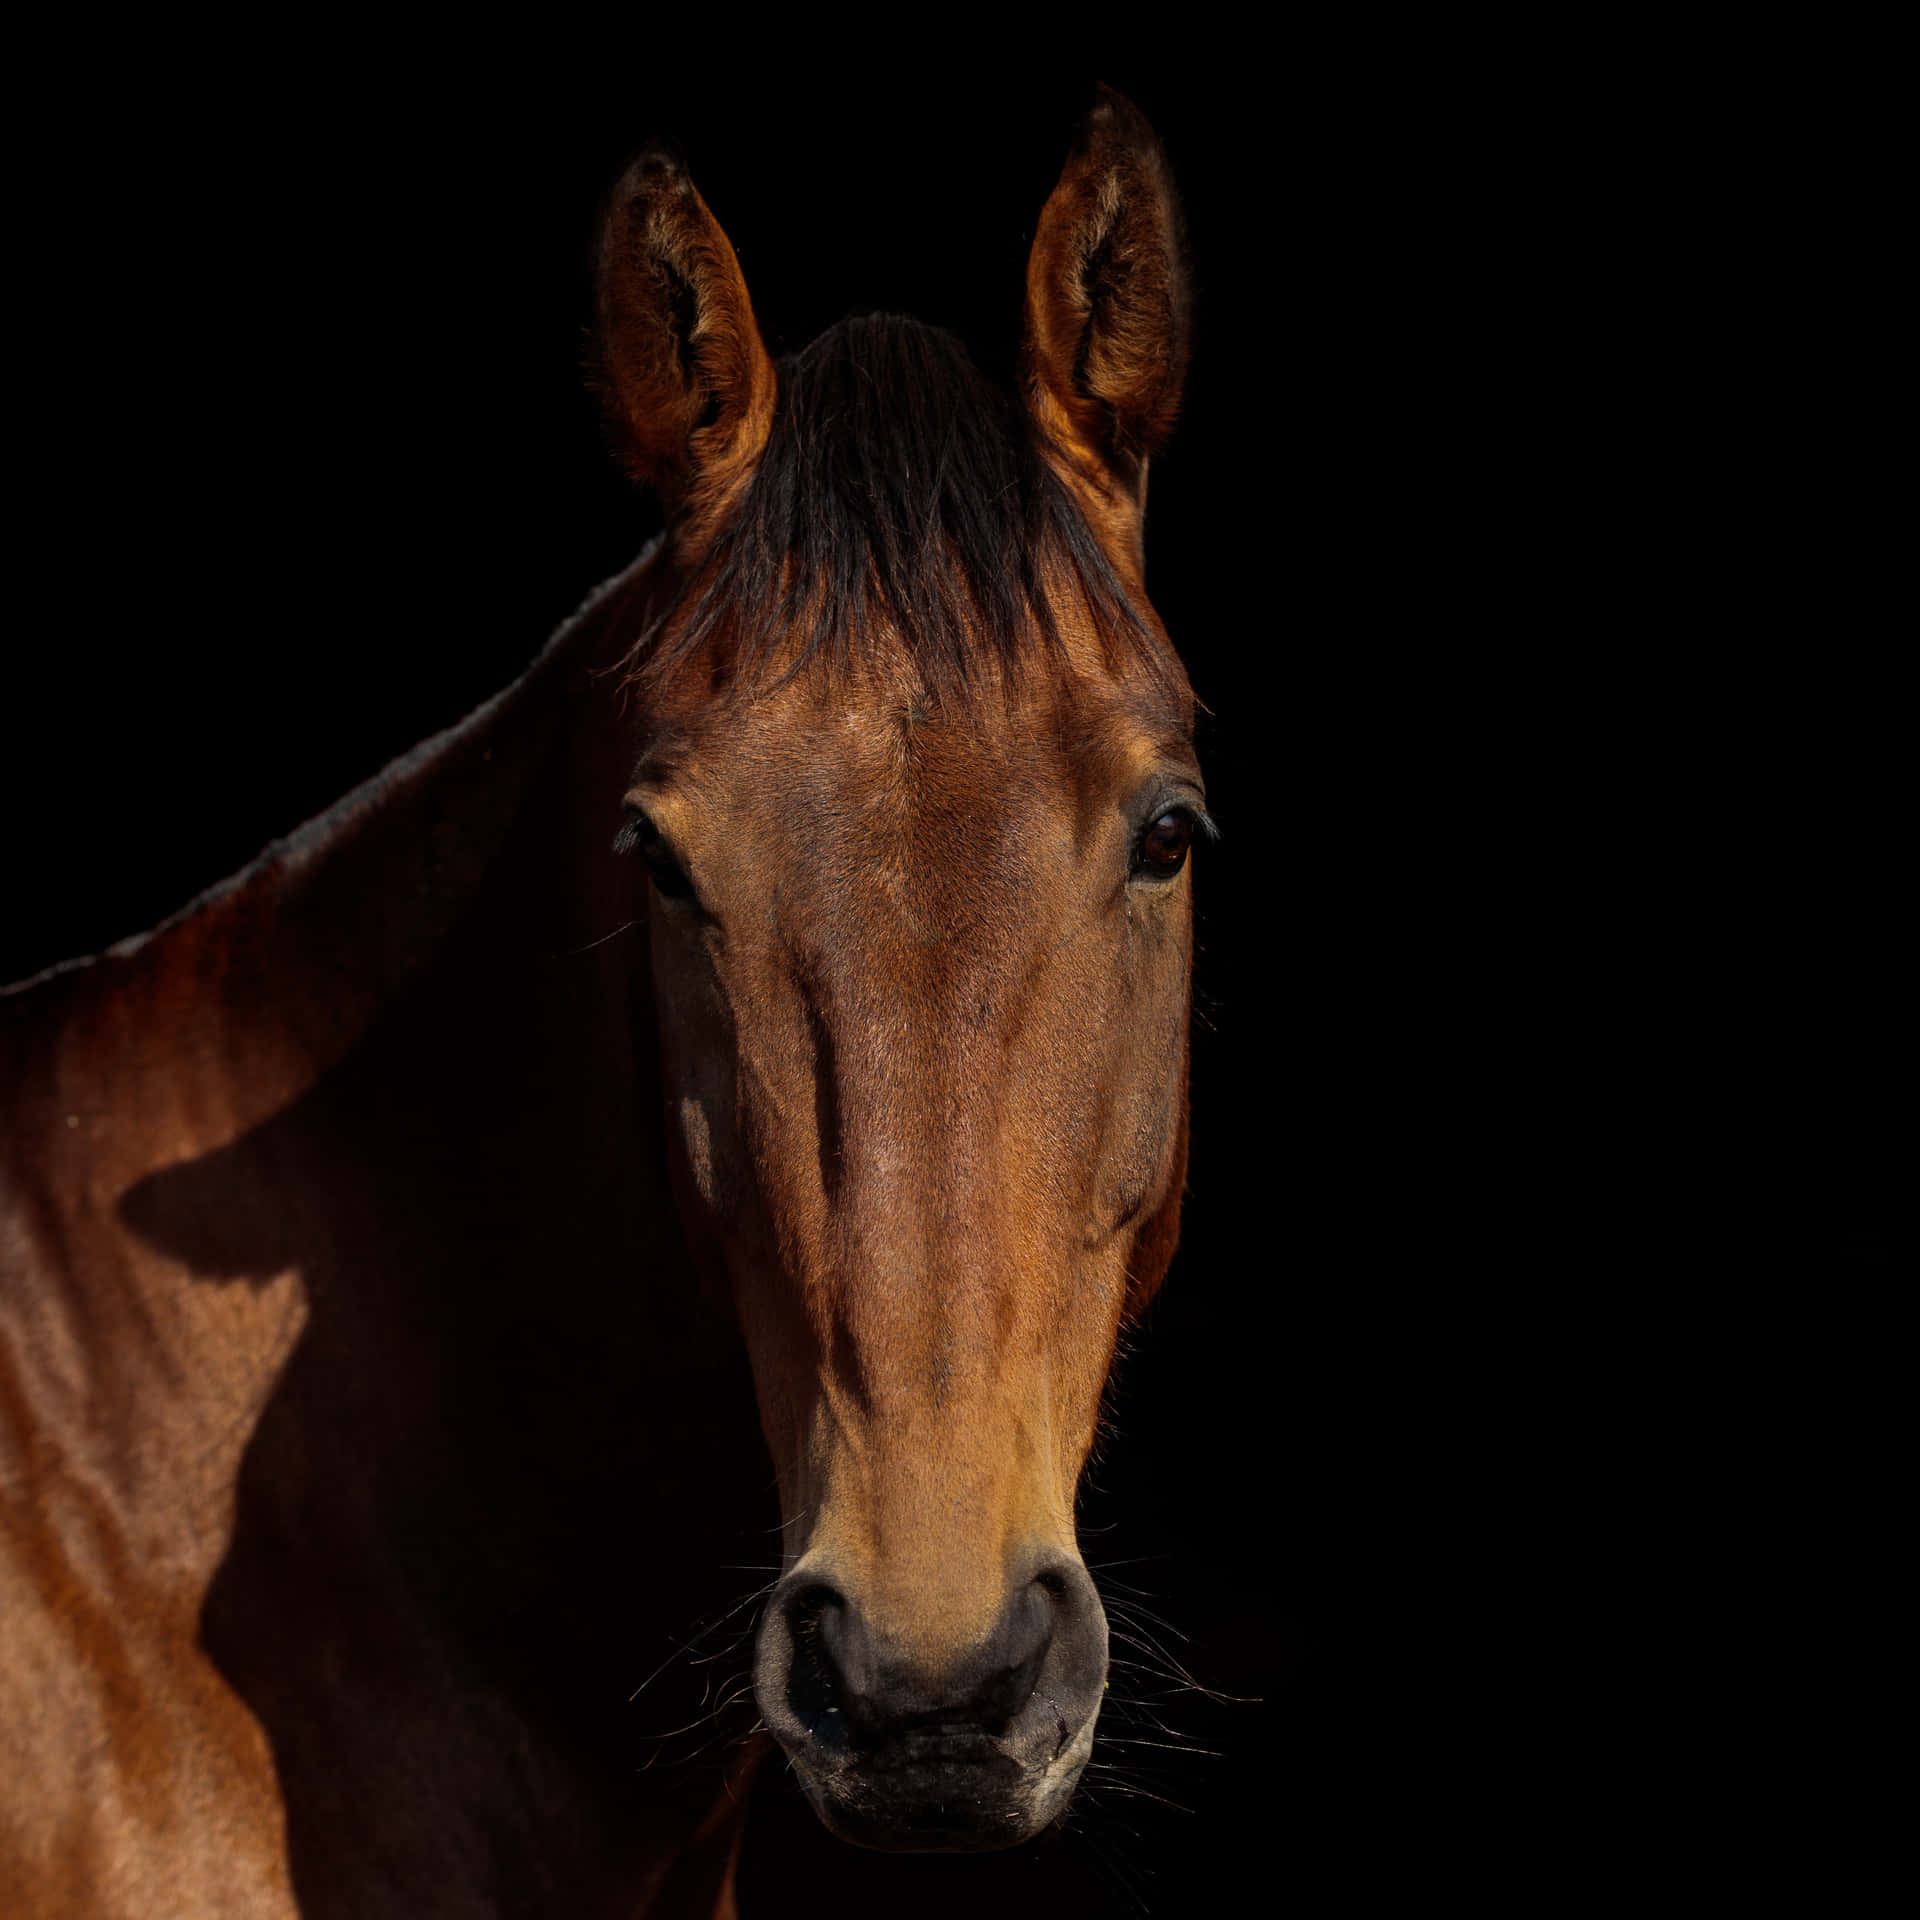 A Brown Horse Is Standing In The Dark Background